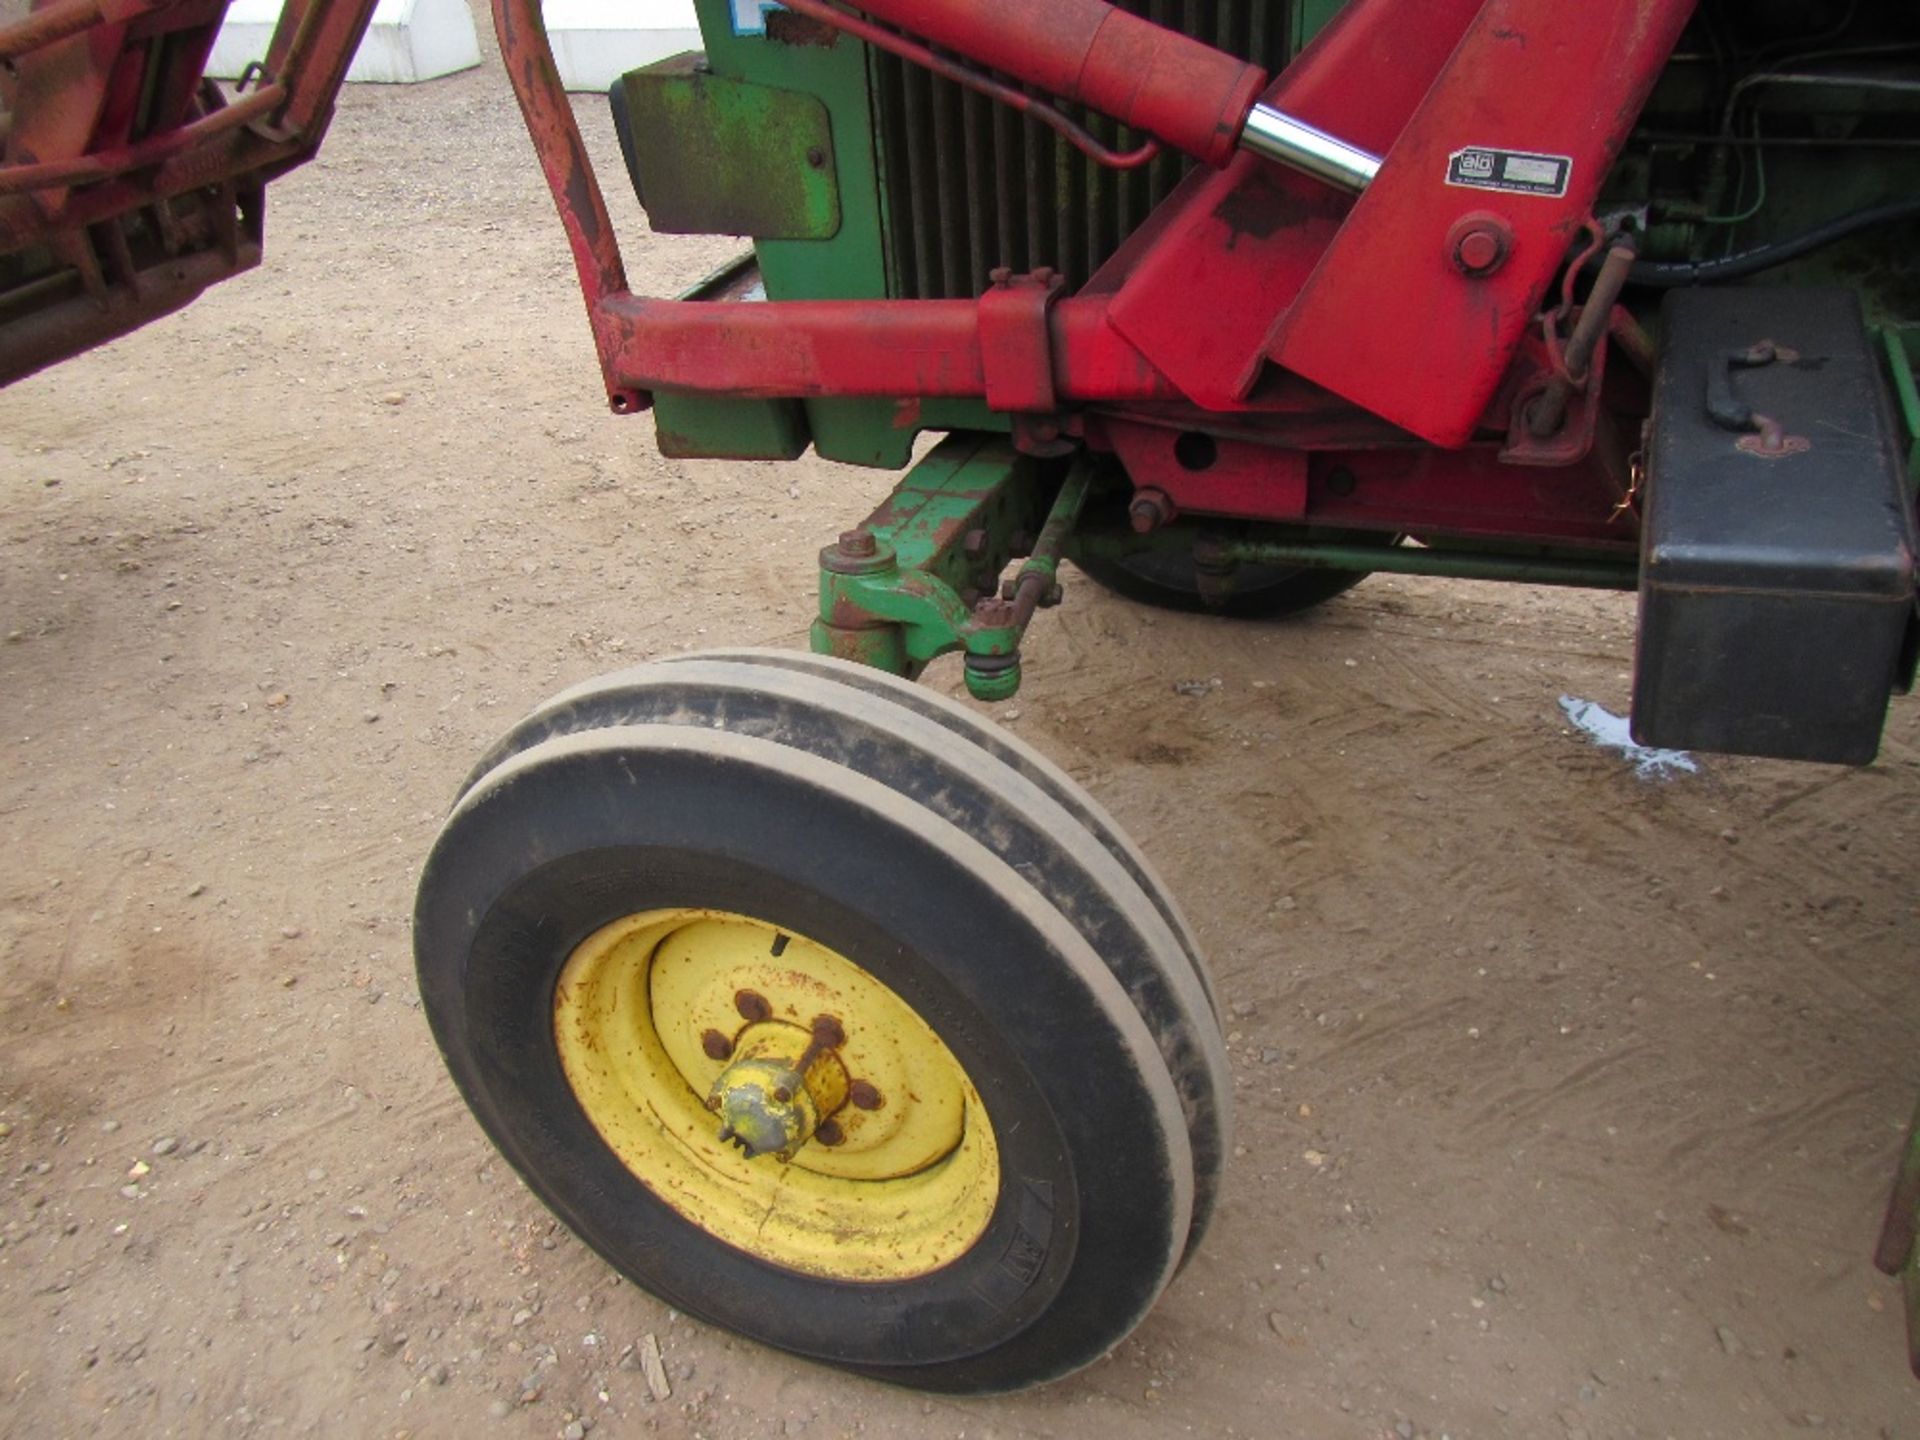 John Deere 3040 4wd Tractor. Subject to TOTAL LOSS INSURANCE CLAIM Reg. No. A122 VFE - Image 11 of 12